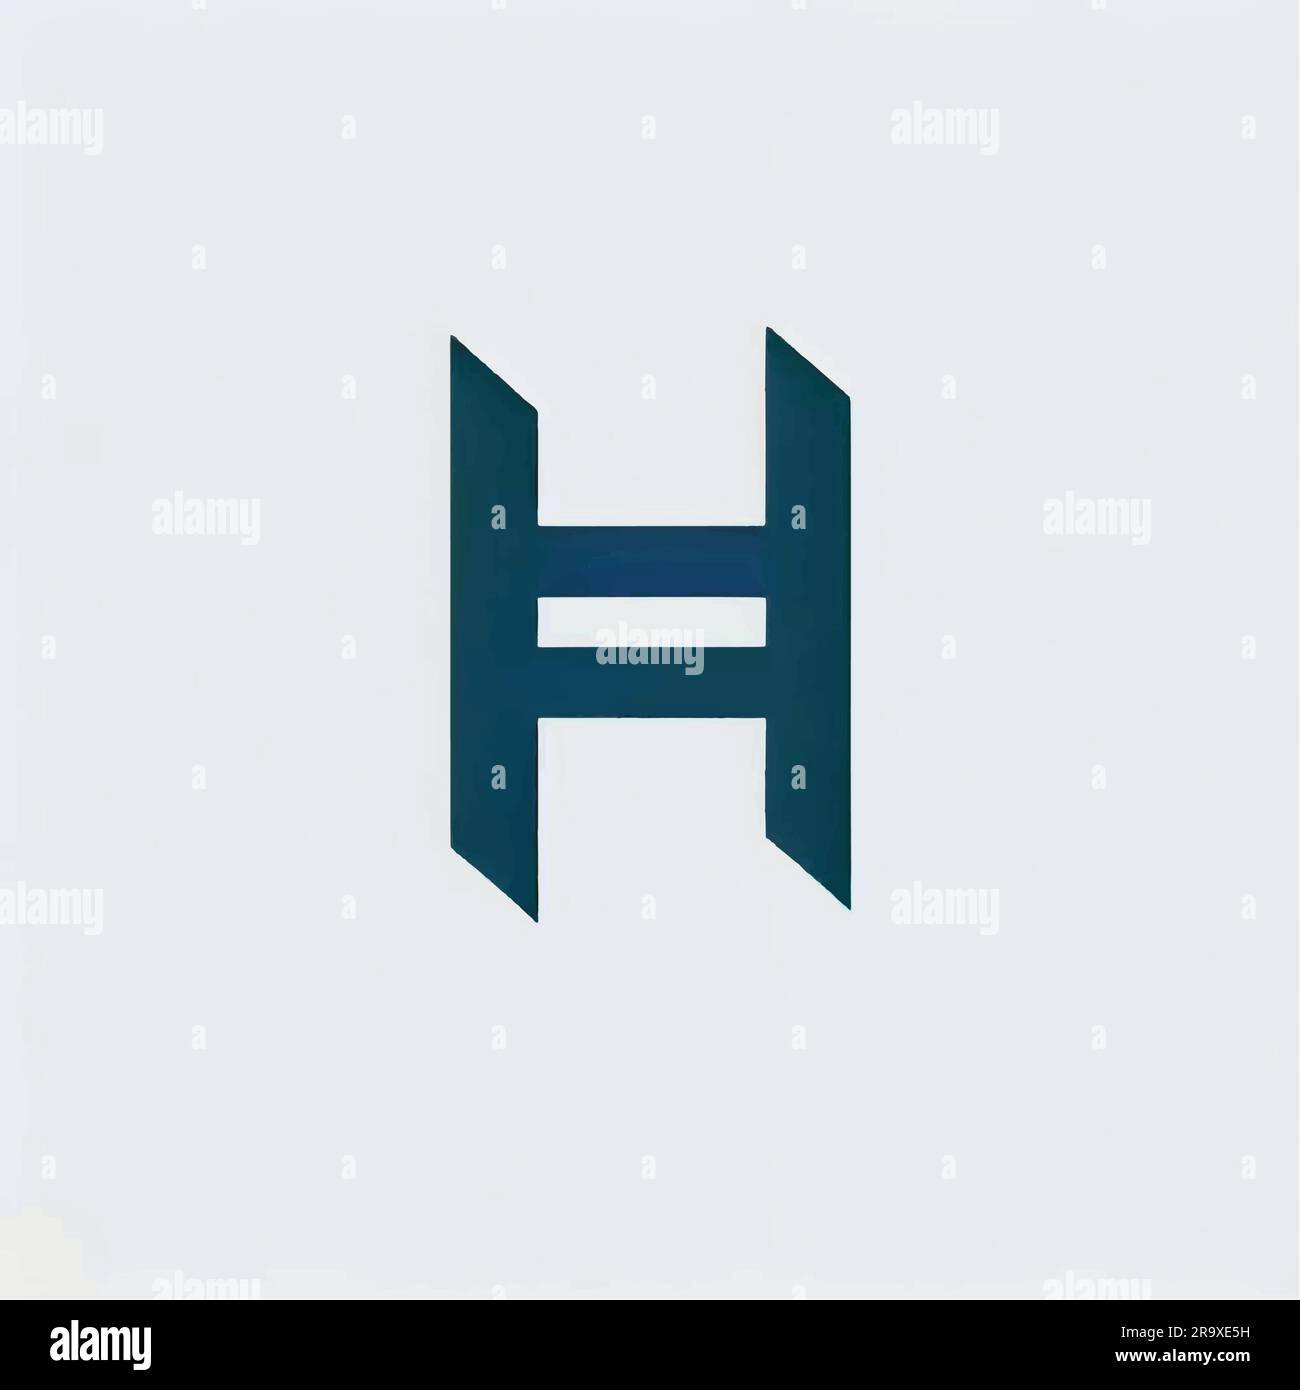 logo illustration of the letter h on a white background Stock Vector